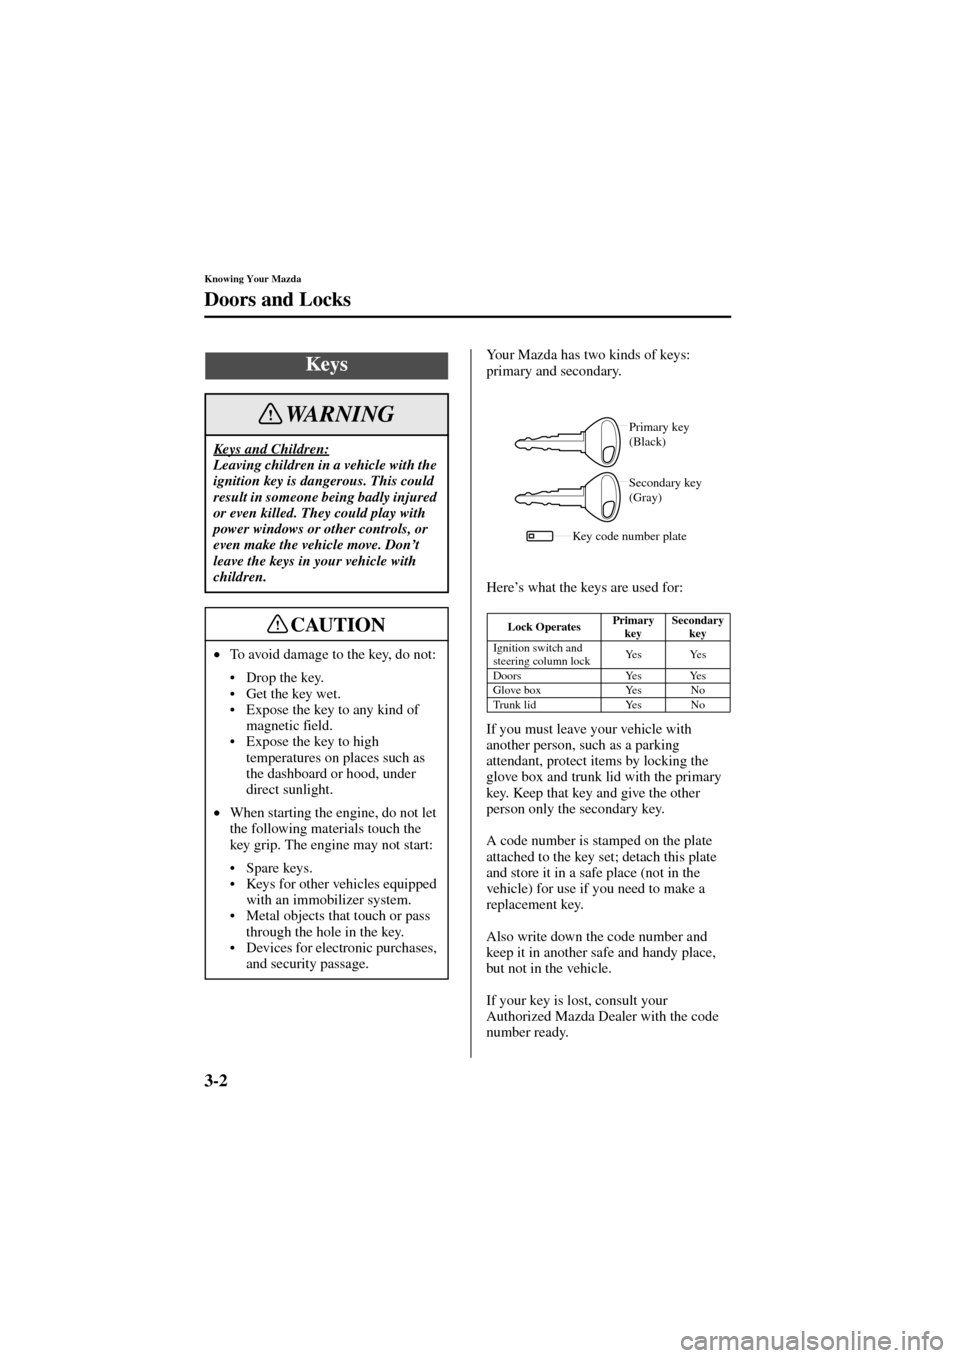 MAZDA MODEL 6 2004   (in English) Repair Manual 3-2
Knowing Your Mazda
Form No. 8R29-EA-02I
Doors and Locks
Your Mazda has two kinds of keys: 
primary and secondary.
Here’s what the keys are used for:
If you must leave your vehicle with 
another 